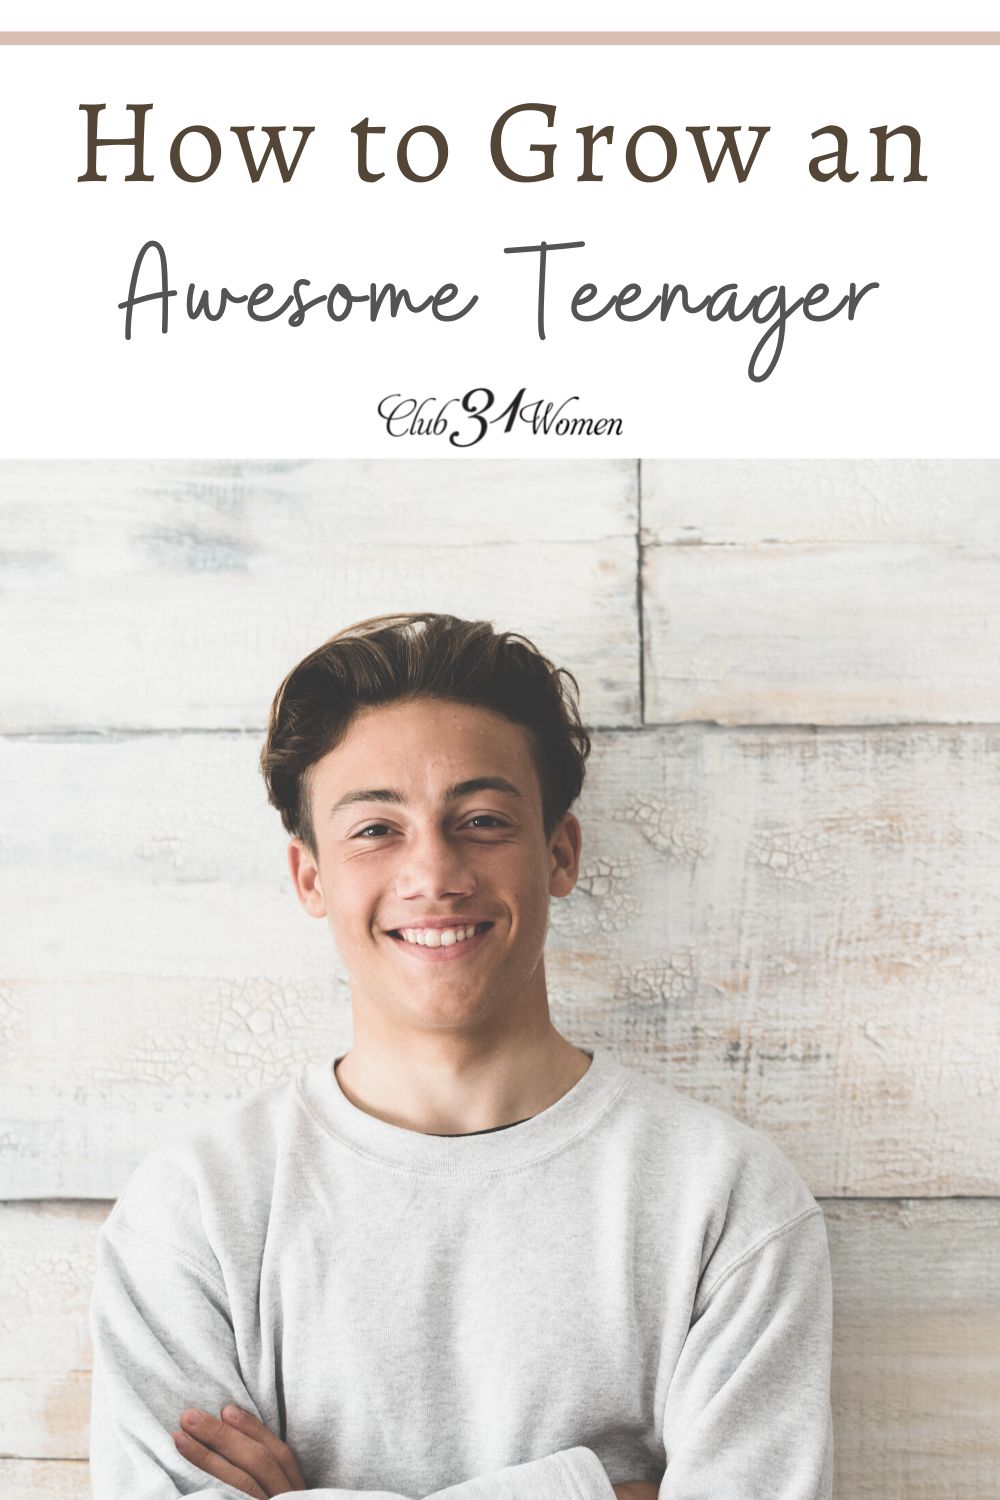 Such an encouraging post! How do you grow an awesome teenager? Is such a thing even possible? Yes! Offering hope that enjoyable teen years can be yours. via @Club31Women